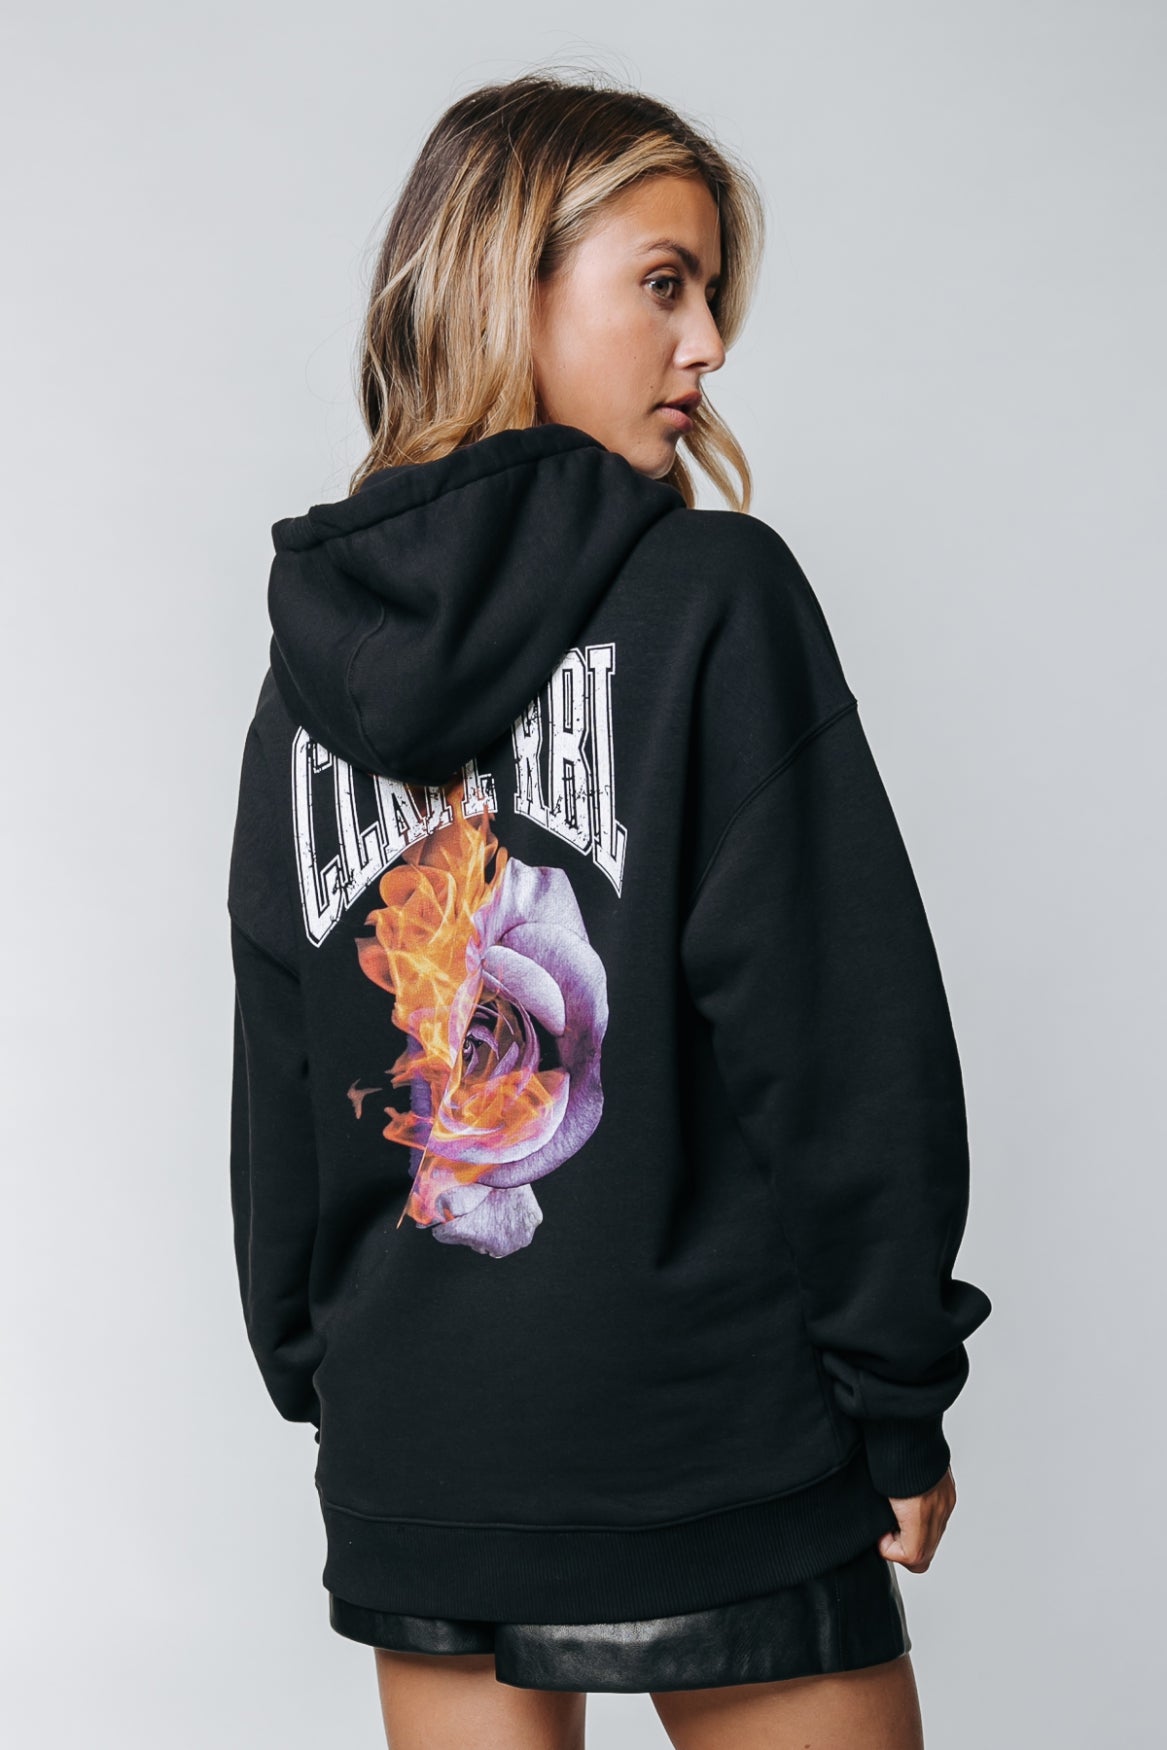 Colourful Rebel Fire Rose Oversized Hoodie | Black 8720603246262